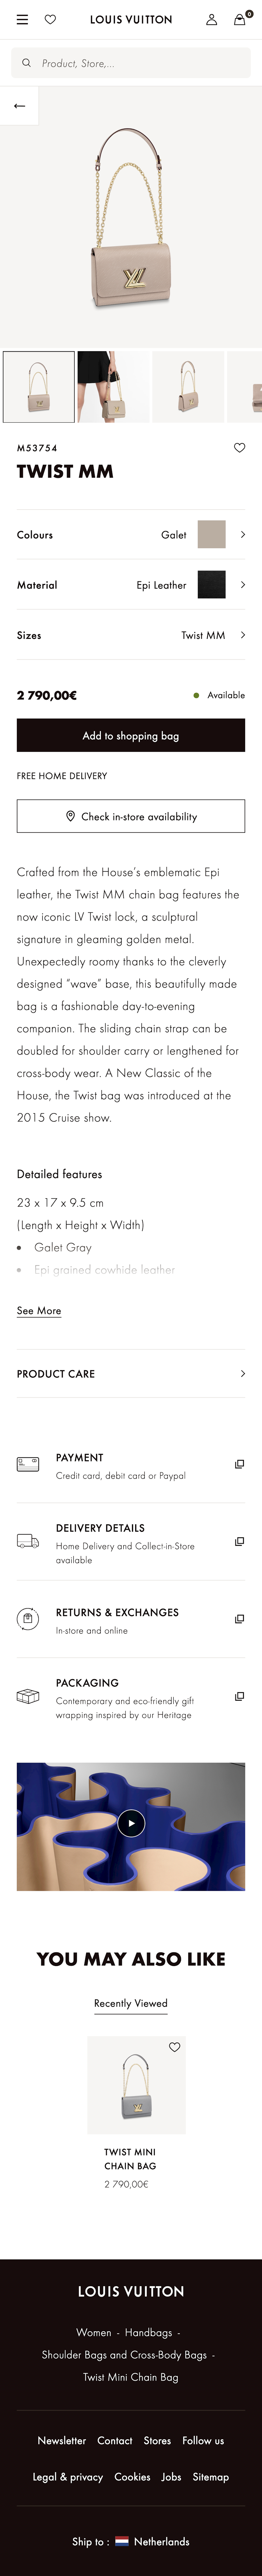 Louis Vuitton's Mobile Product Page – 401 of 1077 Product Page